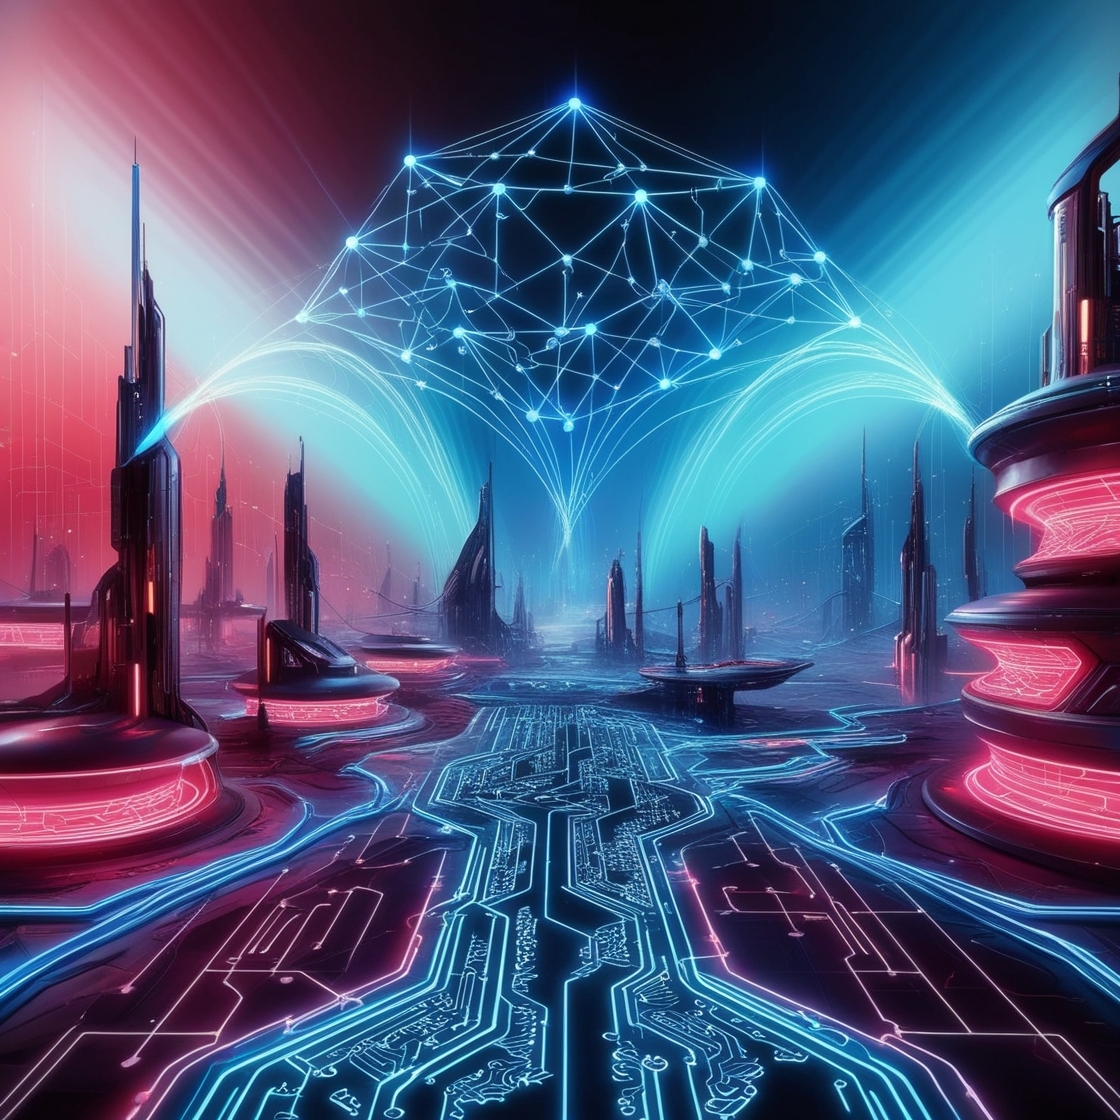 Blockchainscape, digital art, depicts a futuristic cityscape with intricate networks of neon-lit nodes and arcs, representing the complex transactions and decentralization of blockchain technology, set against a vibrant, gradient background of electric blue and crimson, evoking a sense of innovation and dynamism, with sleek, high-tech architectural elements and pulsing circuits, conveying a Cinematic, cyberpunk atmosphere, illuminated by soft, ethereal glows, with subtle grid patterns and 3D geometries adding depth and texture to the surreal, futuristic landscape.